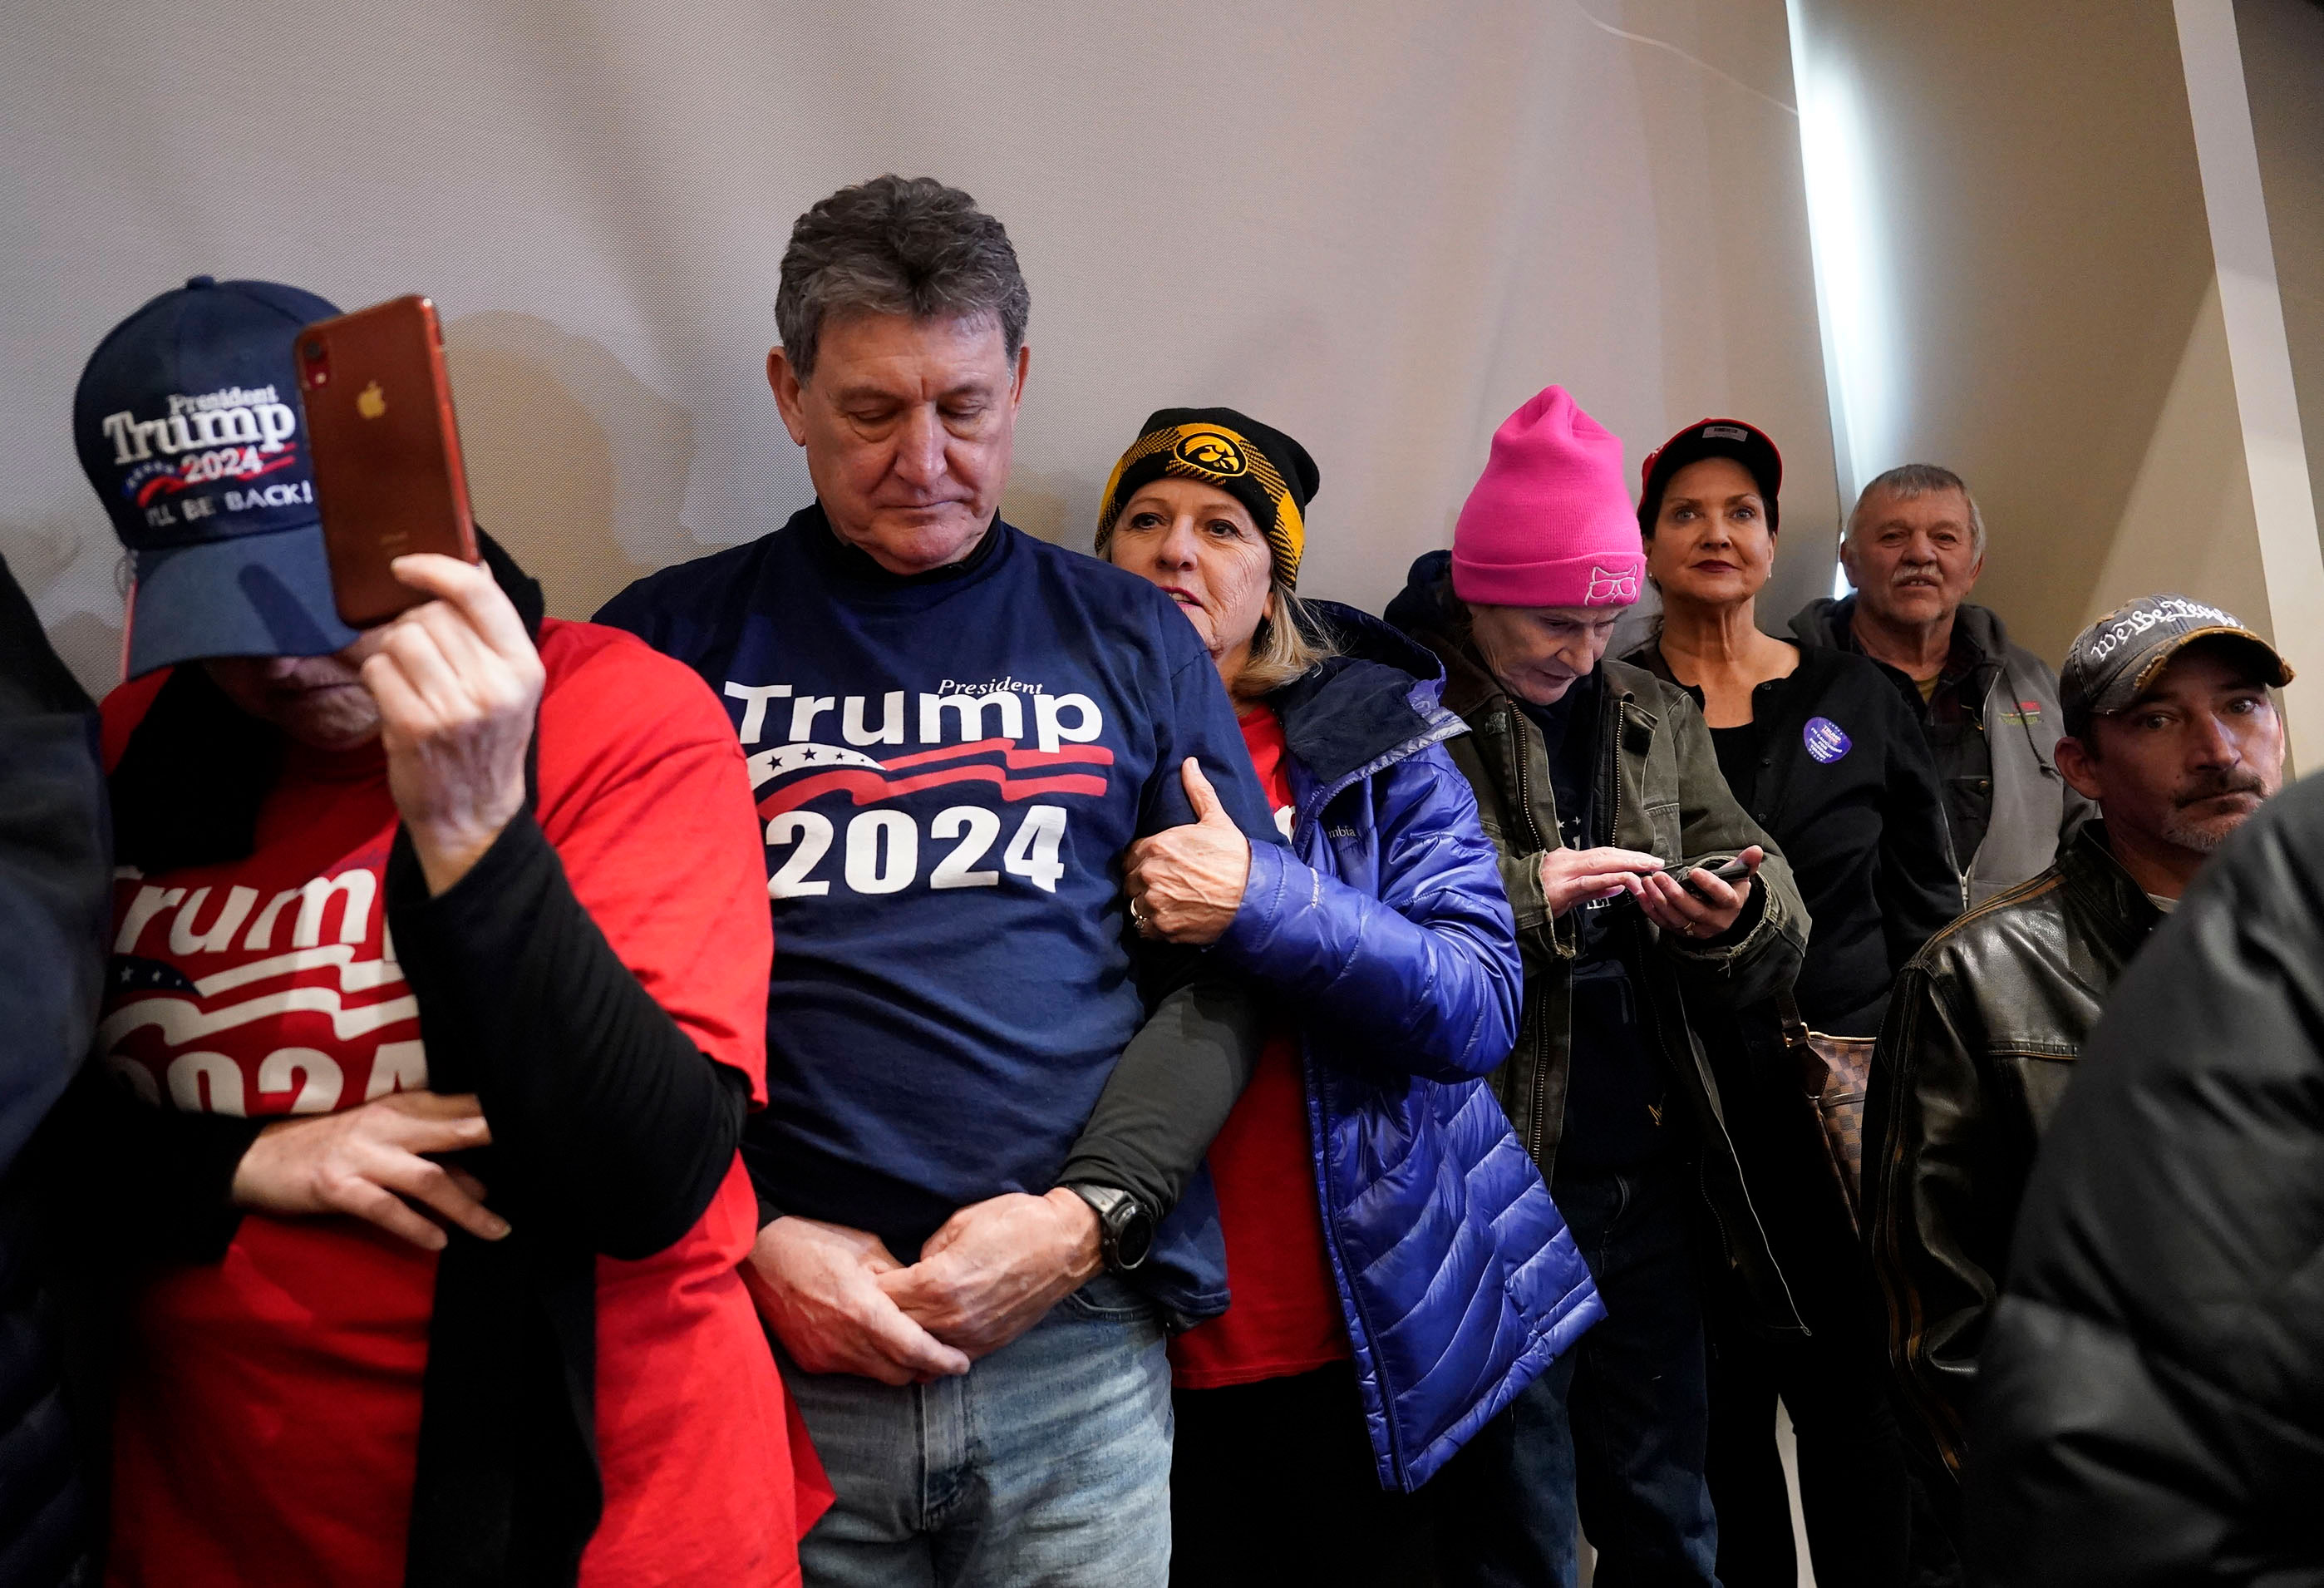 Supporters wait for former president Trump to arrive at a campaign event in Indianola, Iowa, on Sunday.